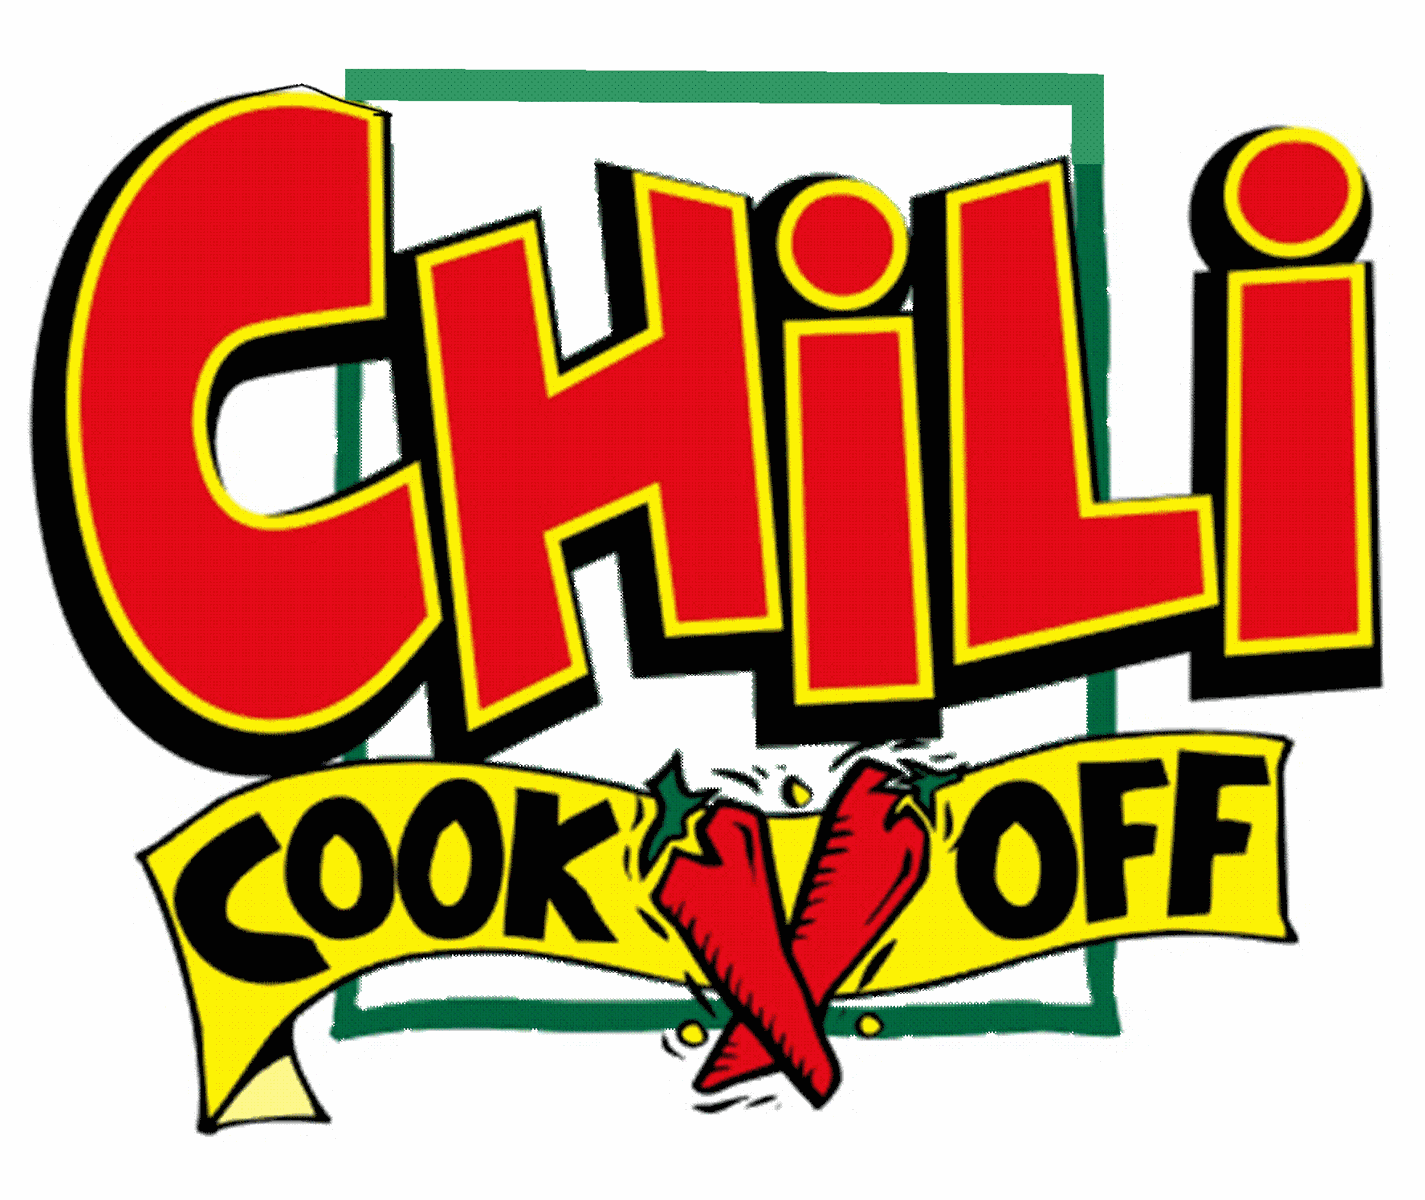 chili-cookoff-clip-art-clipart-best